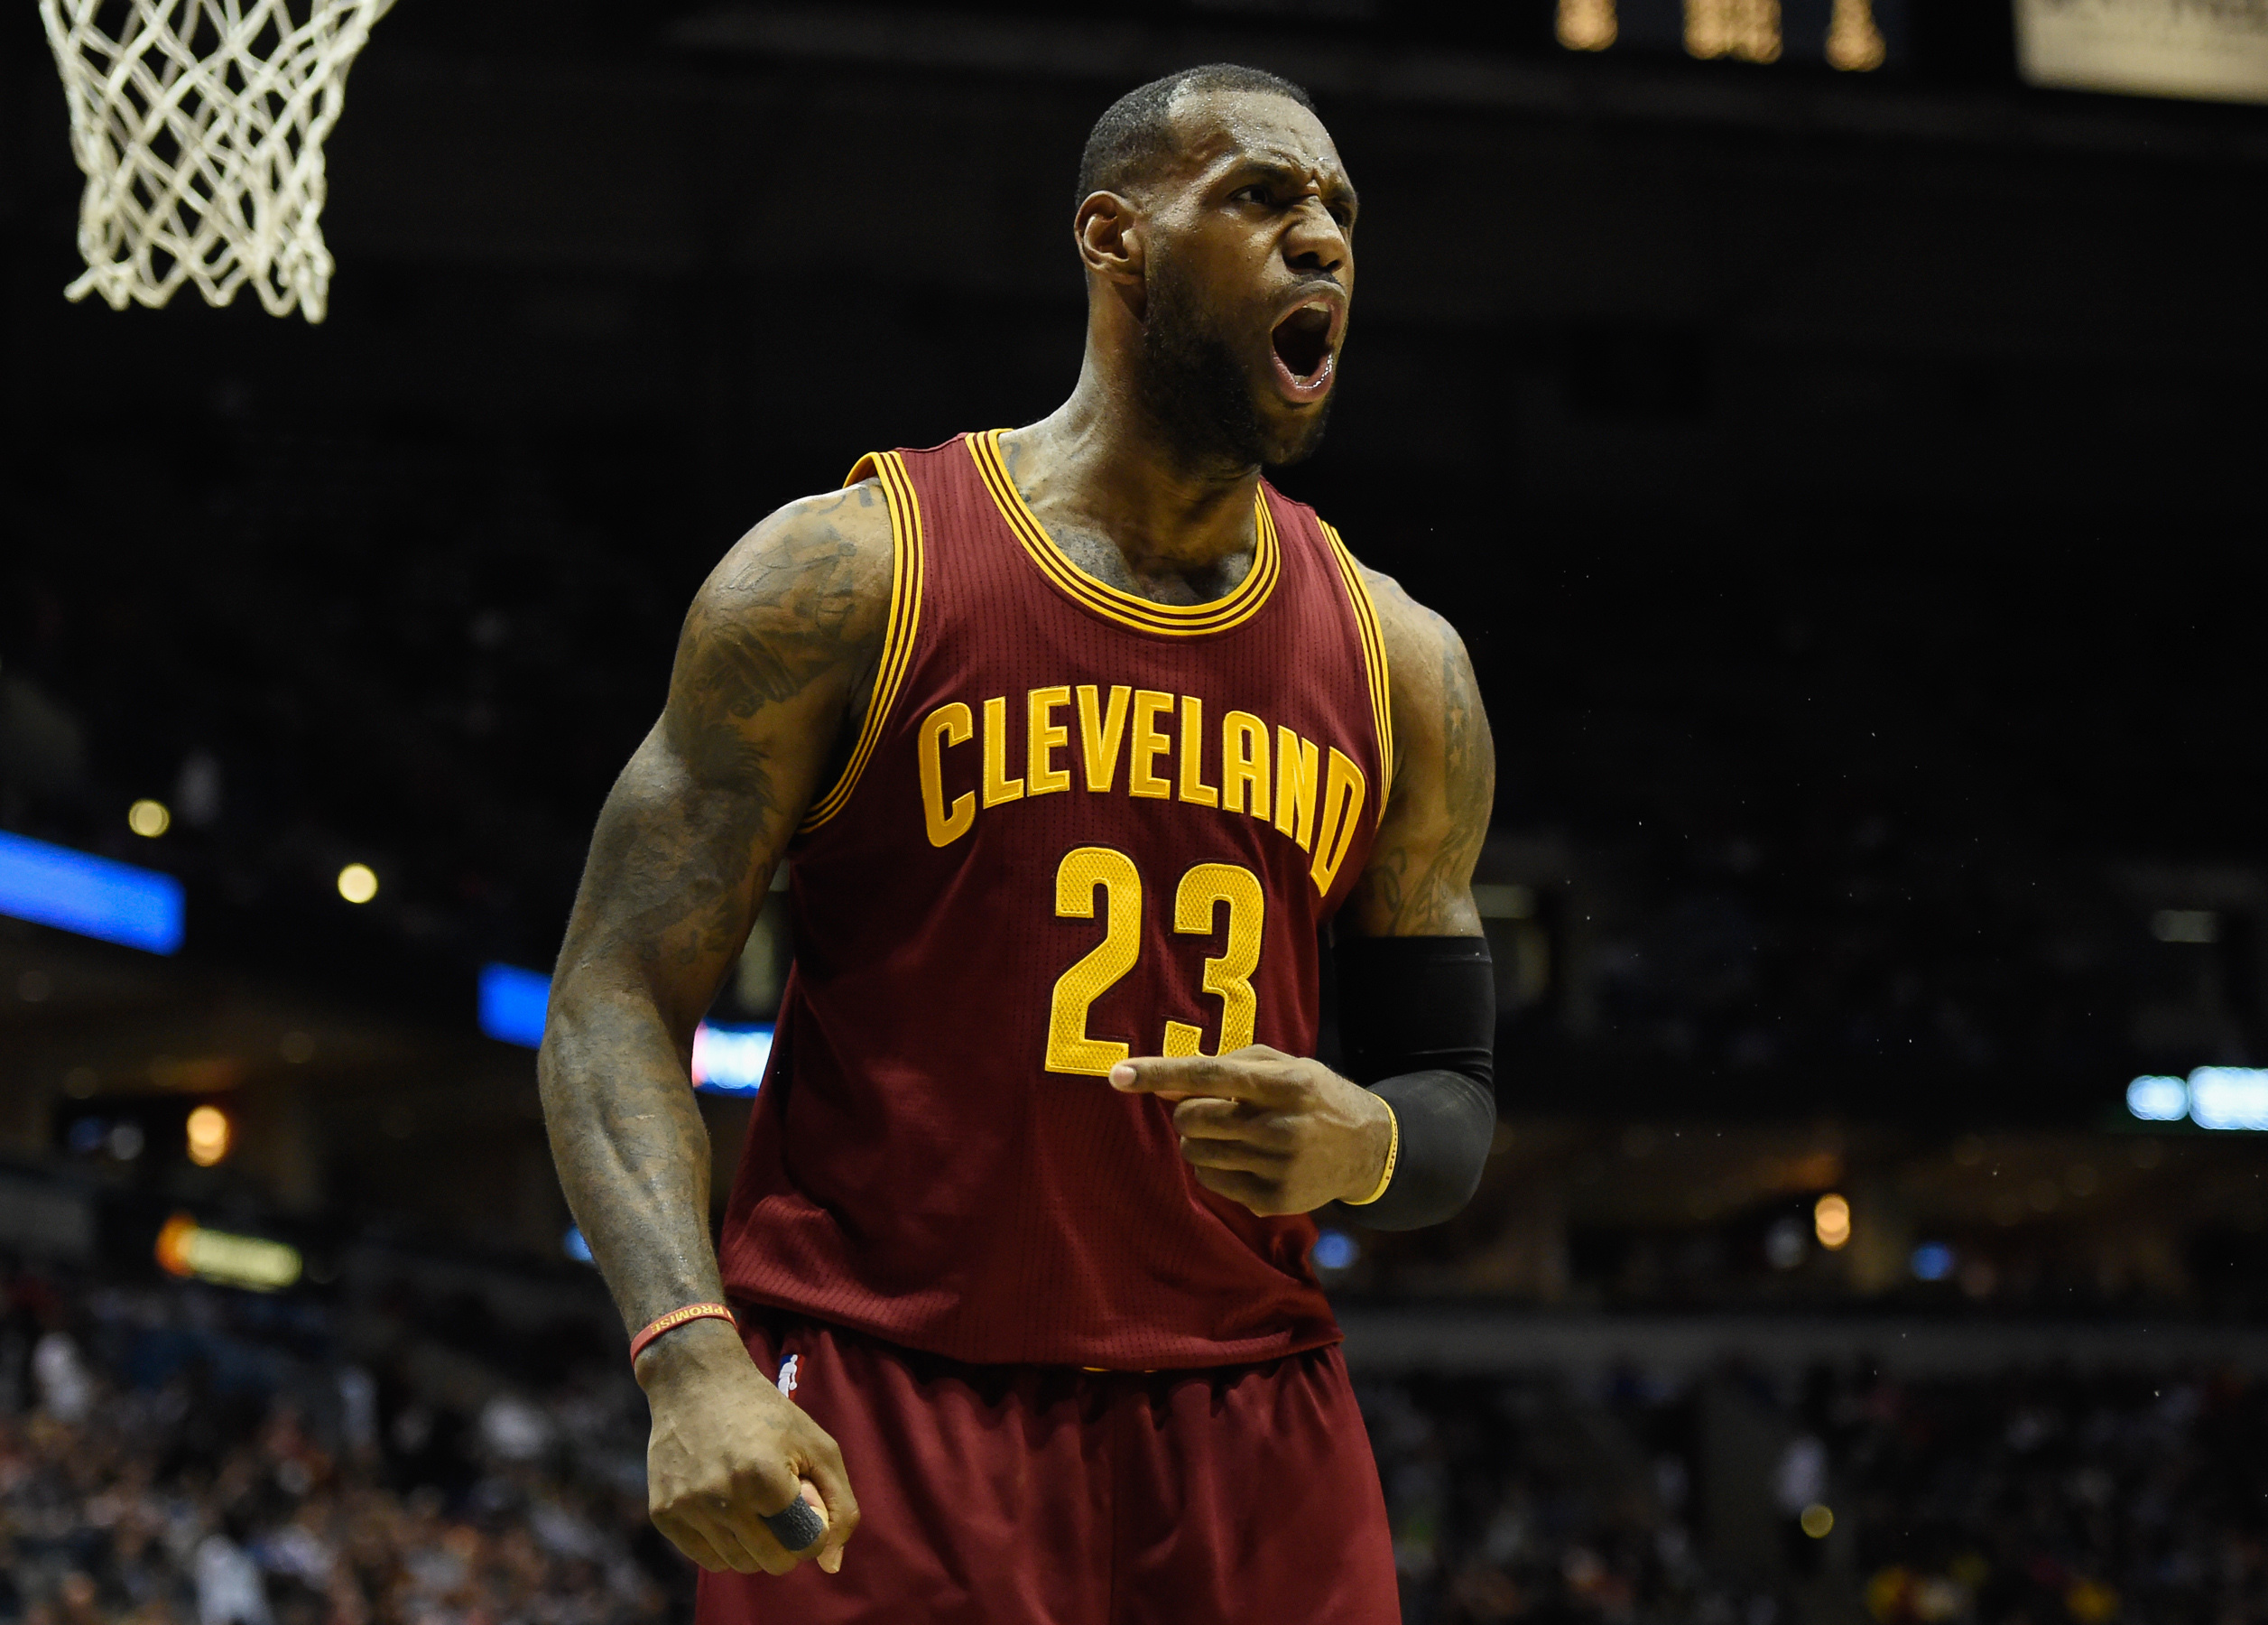 LeBron James Demands 'Respect,' But His Sport Tanked While Others